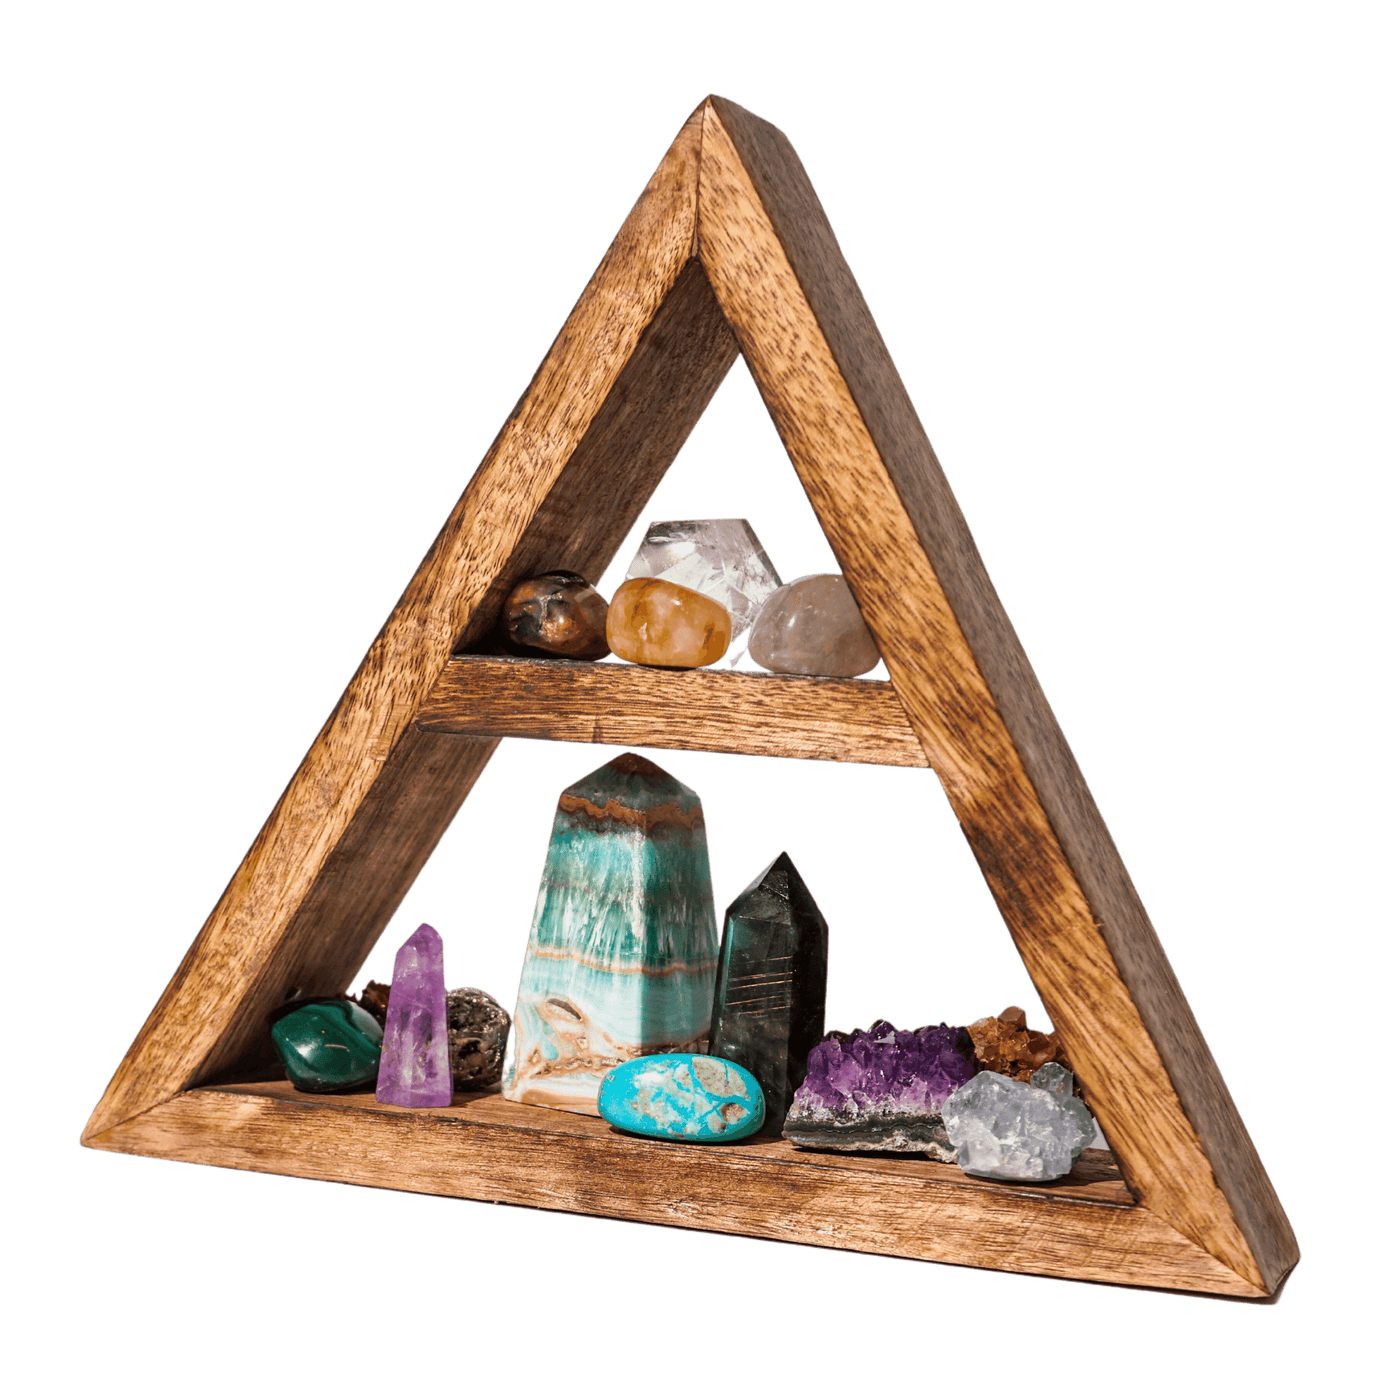 triangular pyramid display shelf for crystals from Energy Muse featuring multicolored crystals in different shapes and sizes.